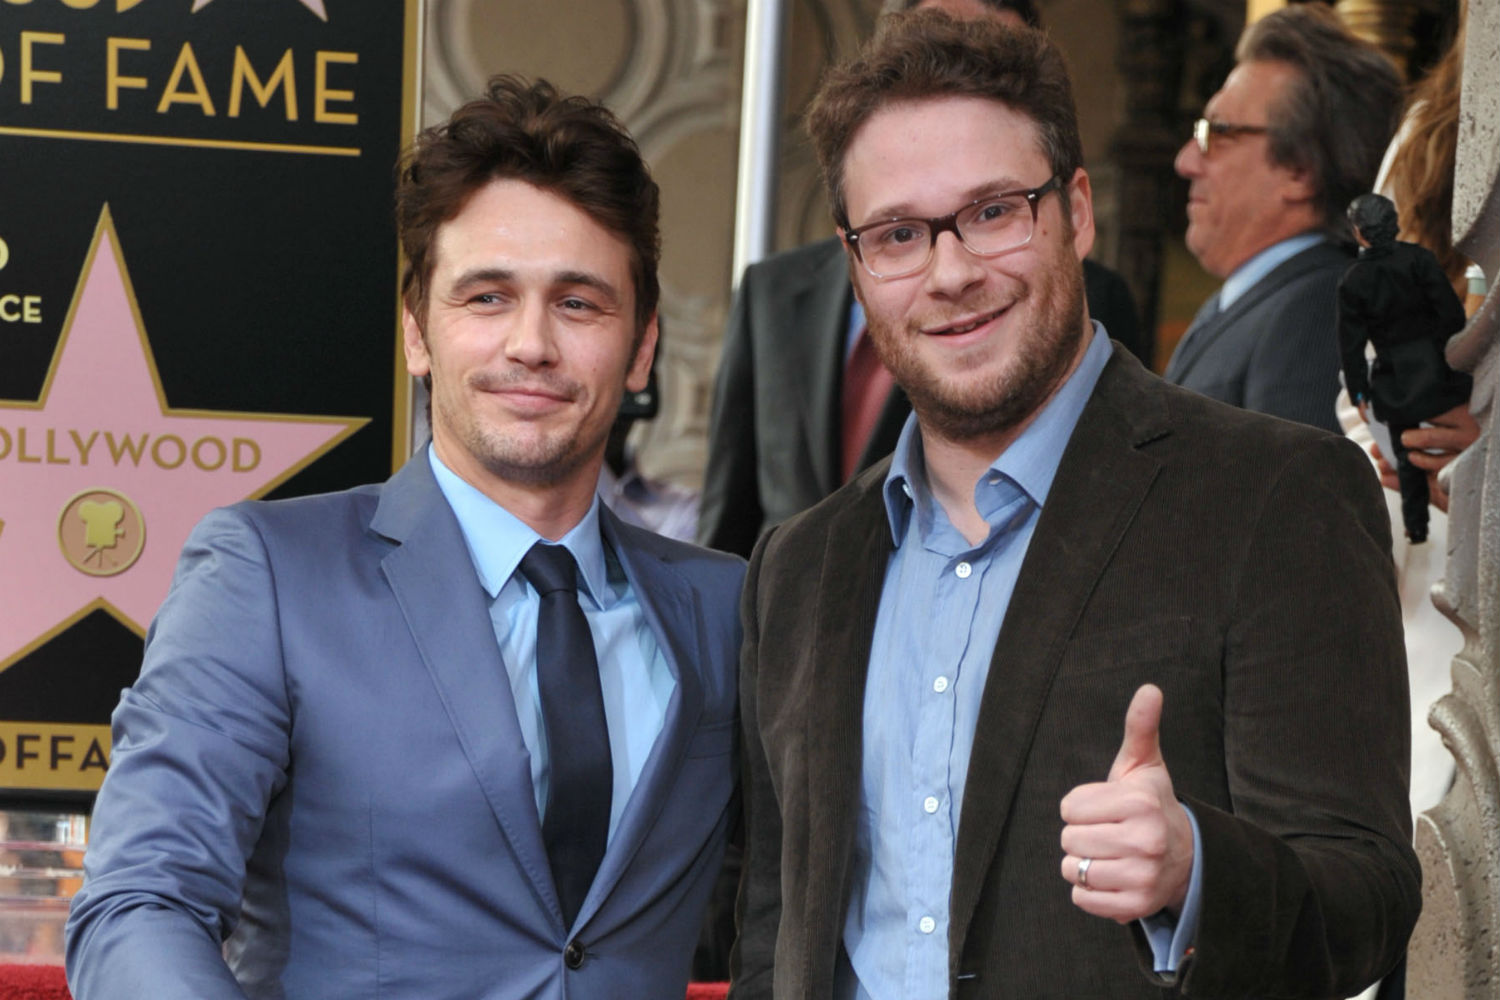 Who all has actor Seth Rogen gotten high with? The answers might surprise you. (John Shearer, Invision/AP)